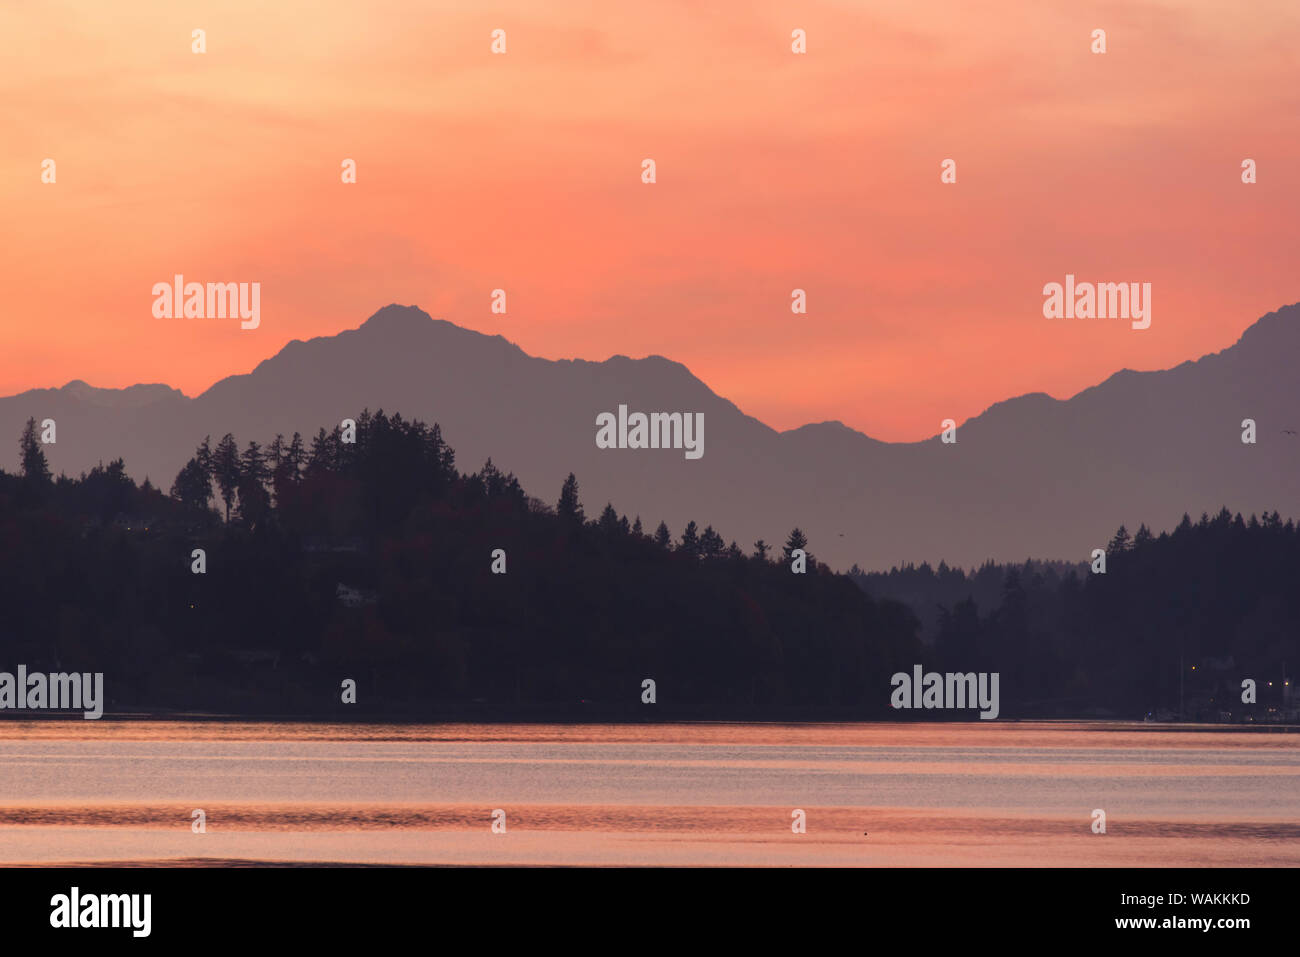 USA, Washington State. Olympic Mountains silhouetted in dramatic light. Calm Puget Sound. Stock Photo